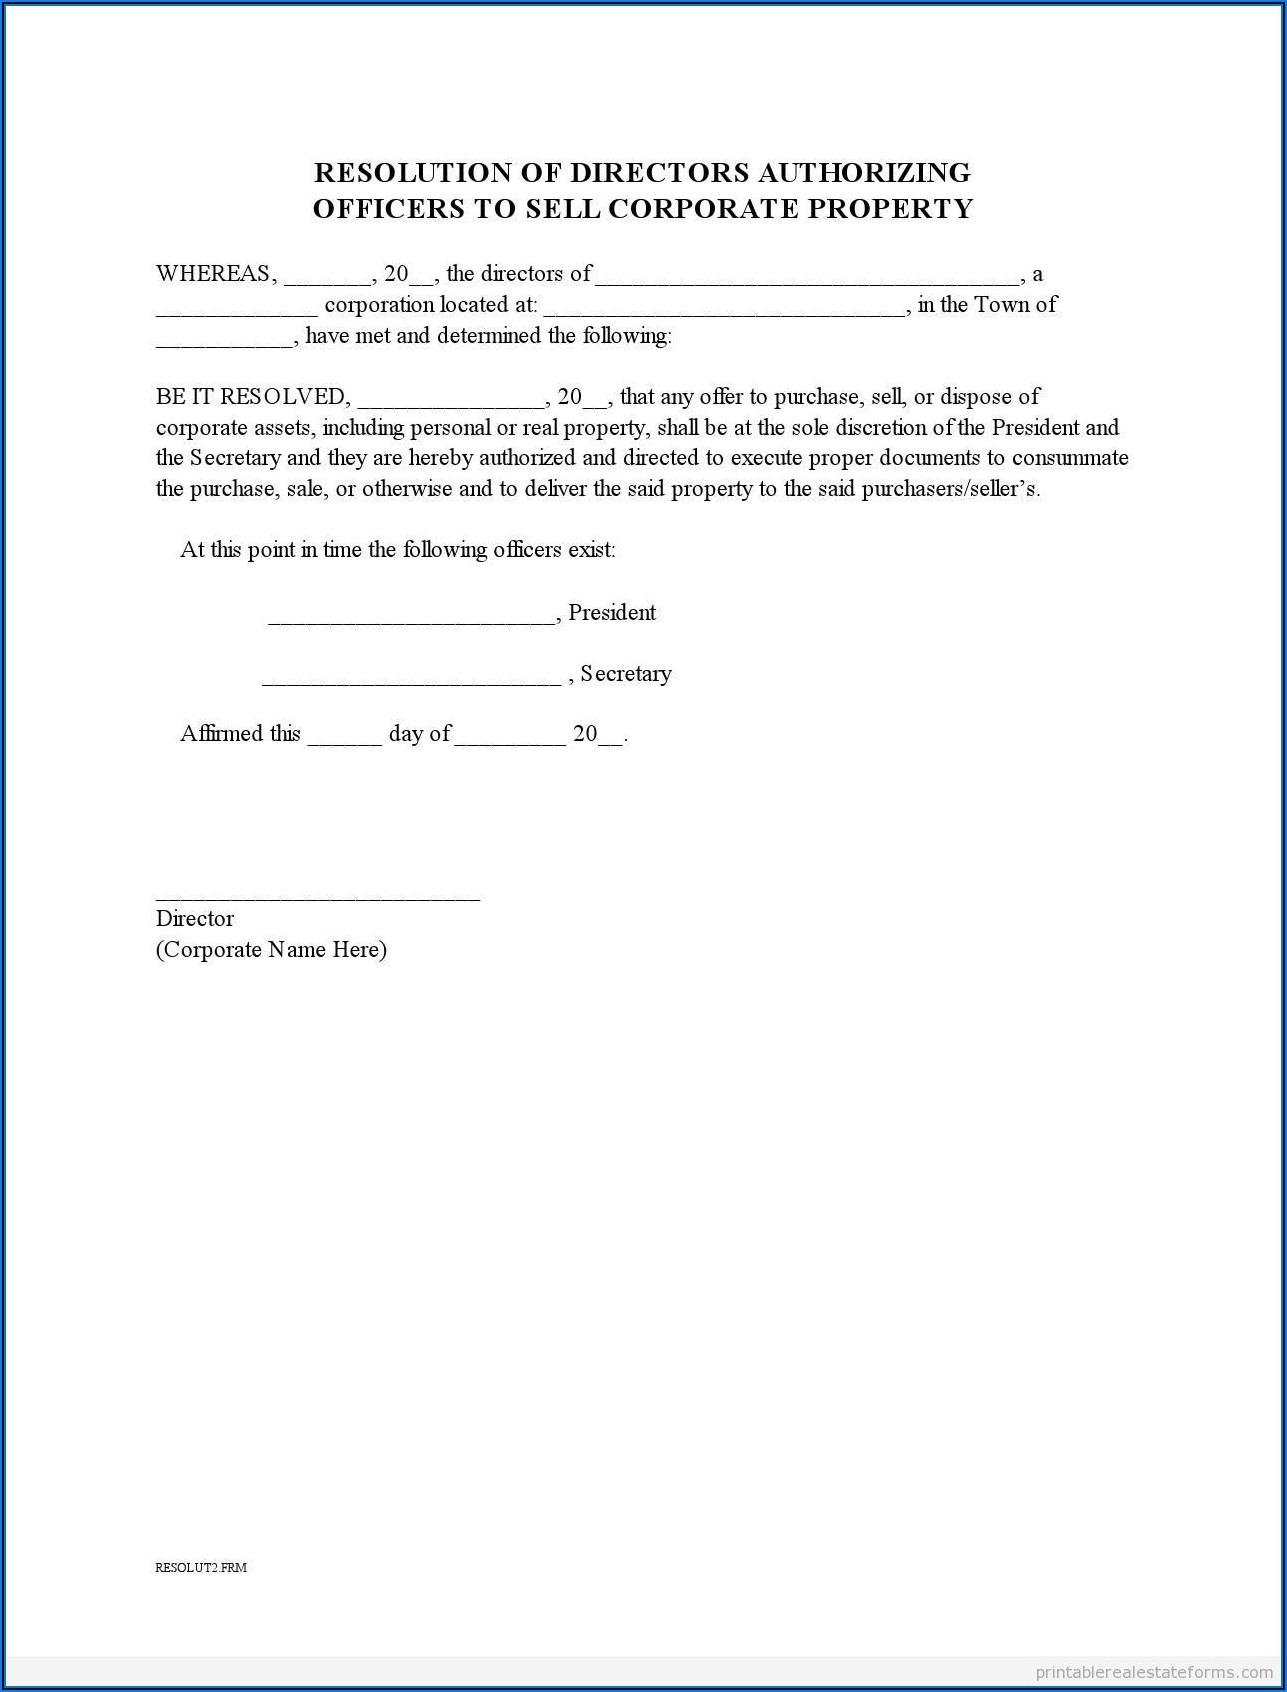 Blank Corporate Authorization Resolution Form